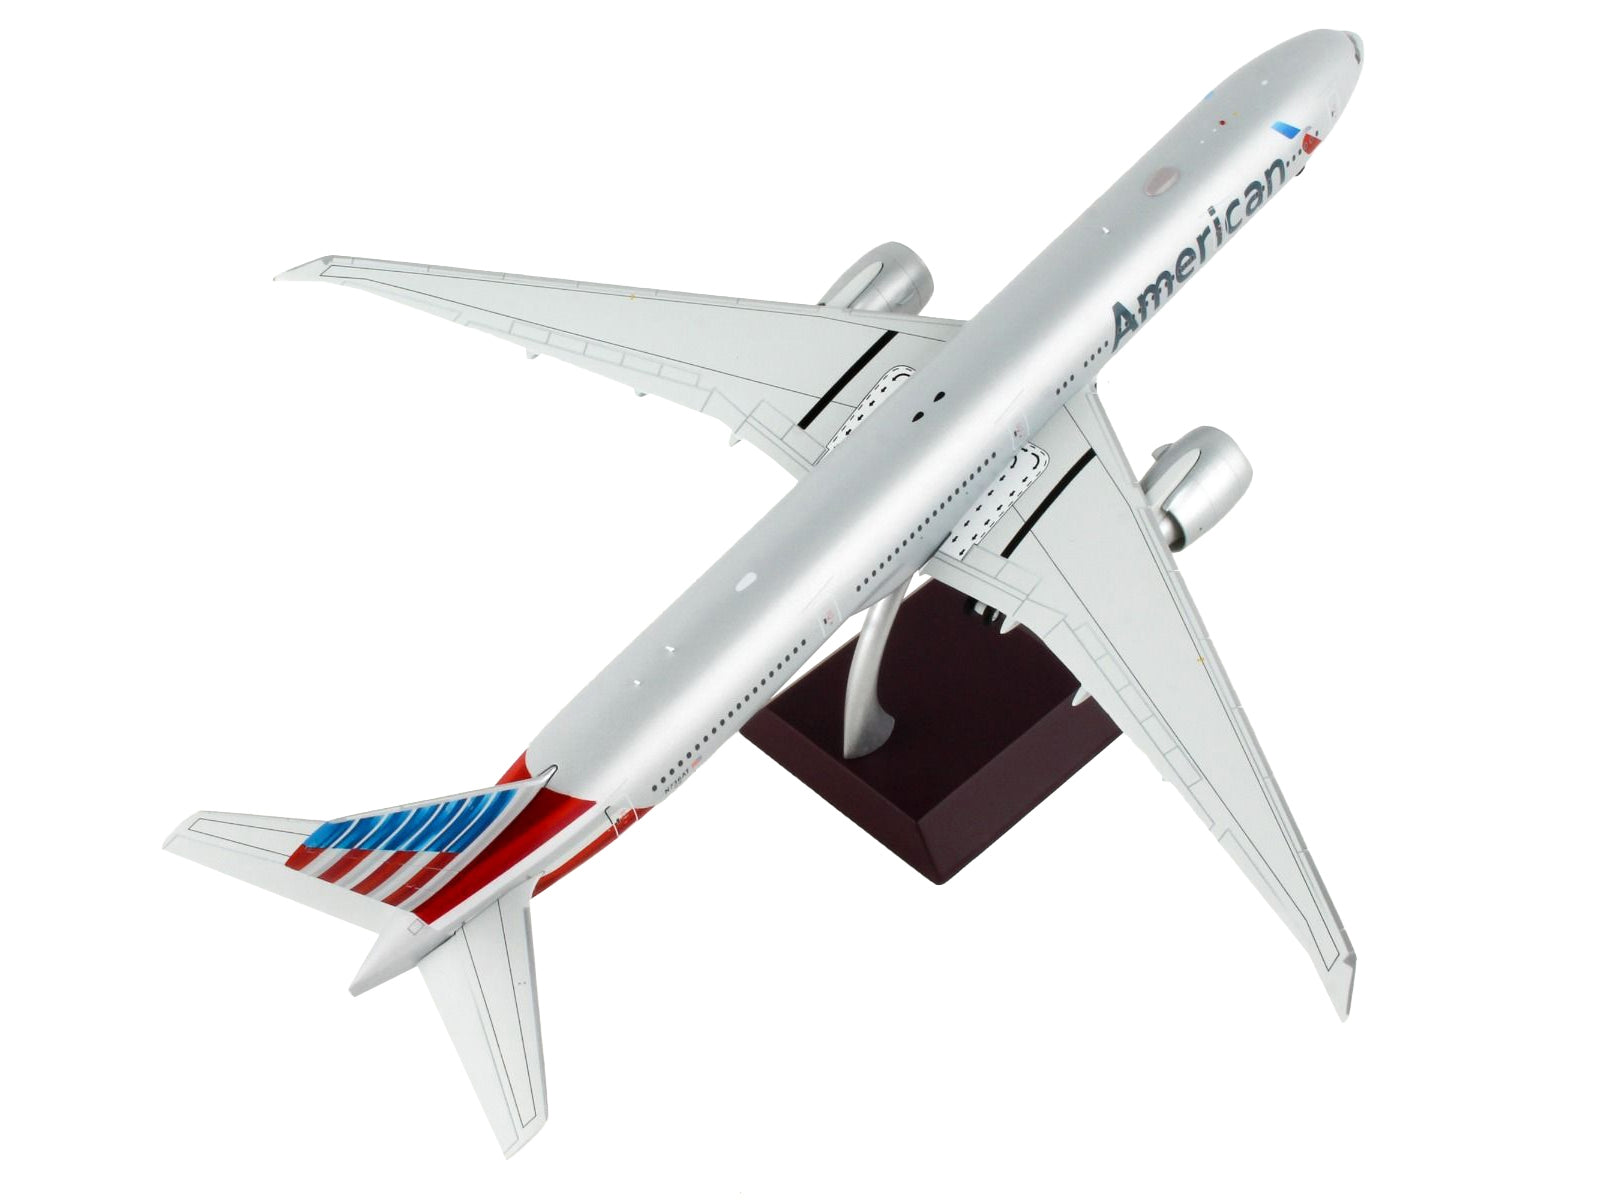 Boeing 777-300ER Commercial Aircraft "American Airlines" Silver "Gemini 200" Series 1/200 Diecast Model Airplane by GeminiJets